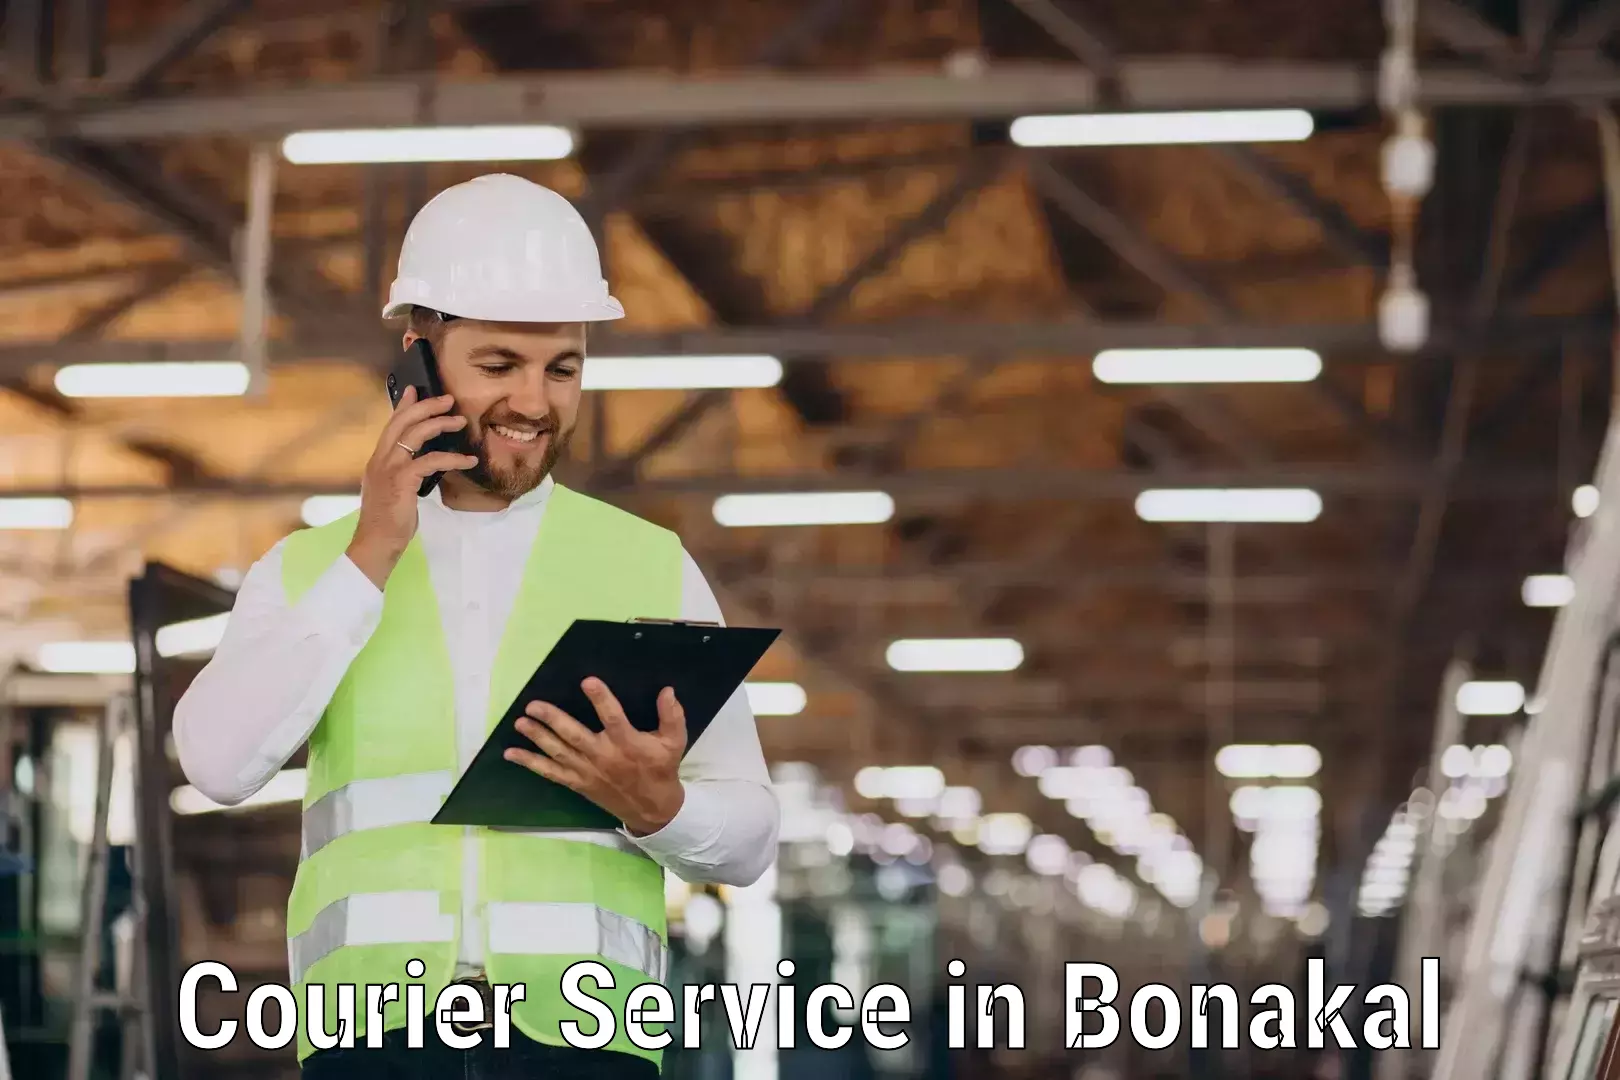 User-friendly delivery service in Bonakal